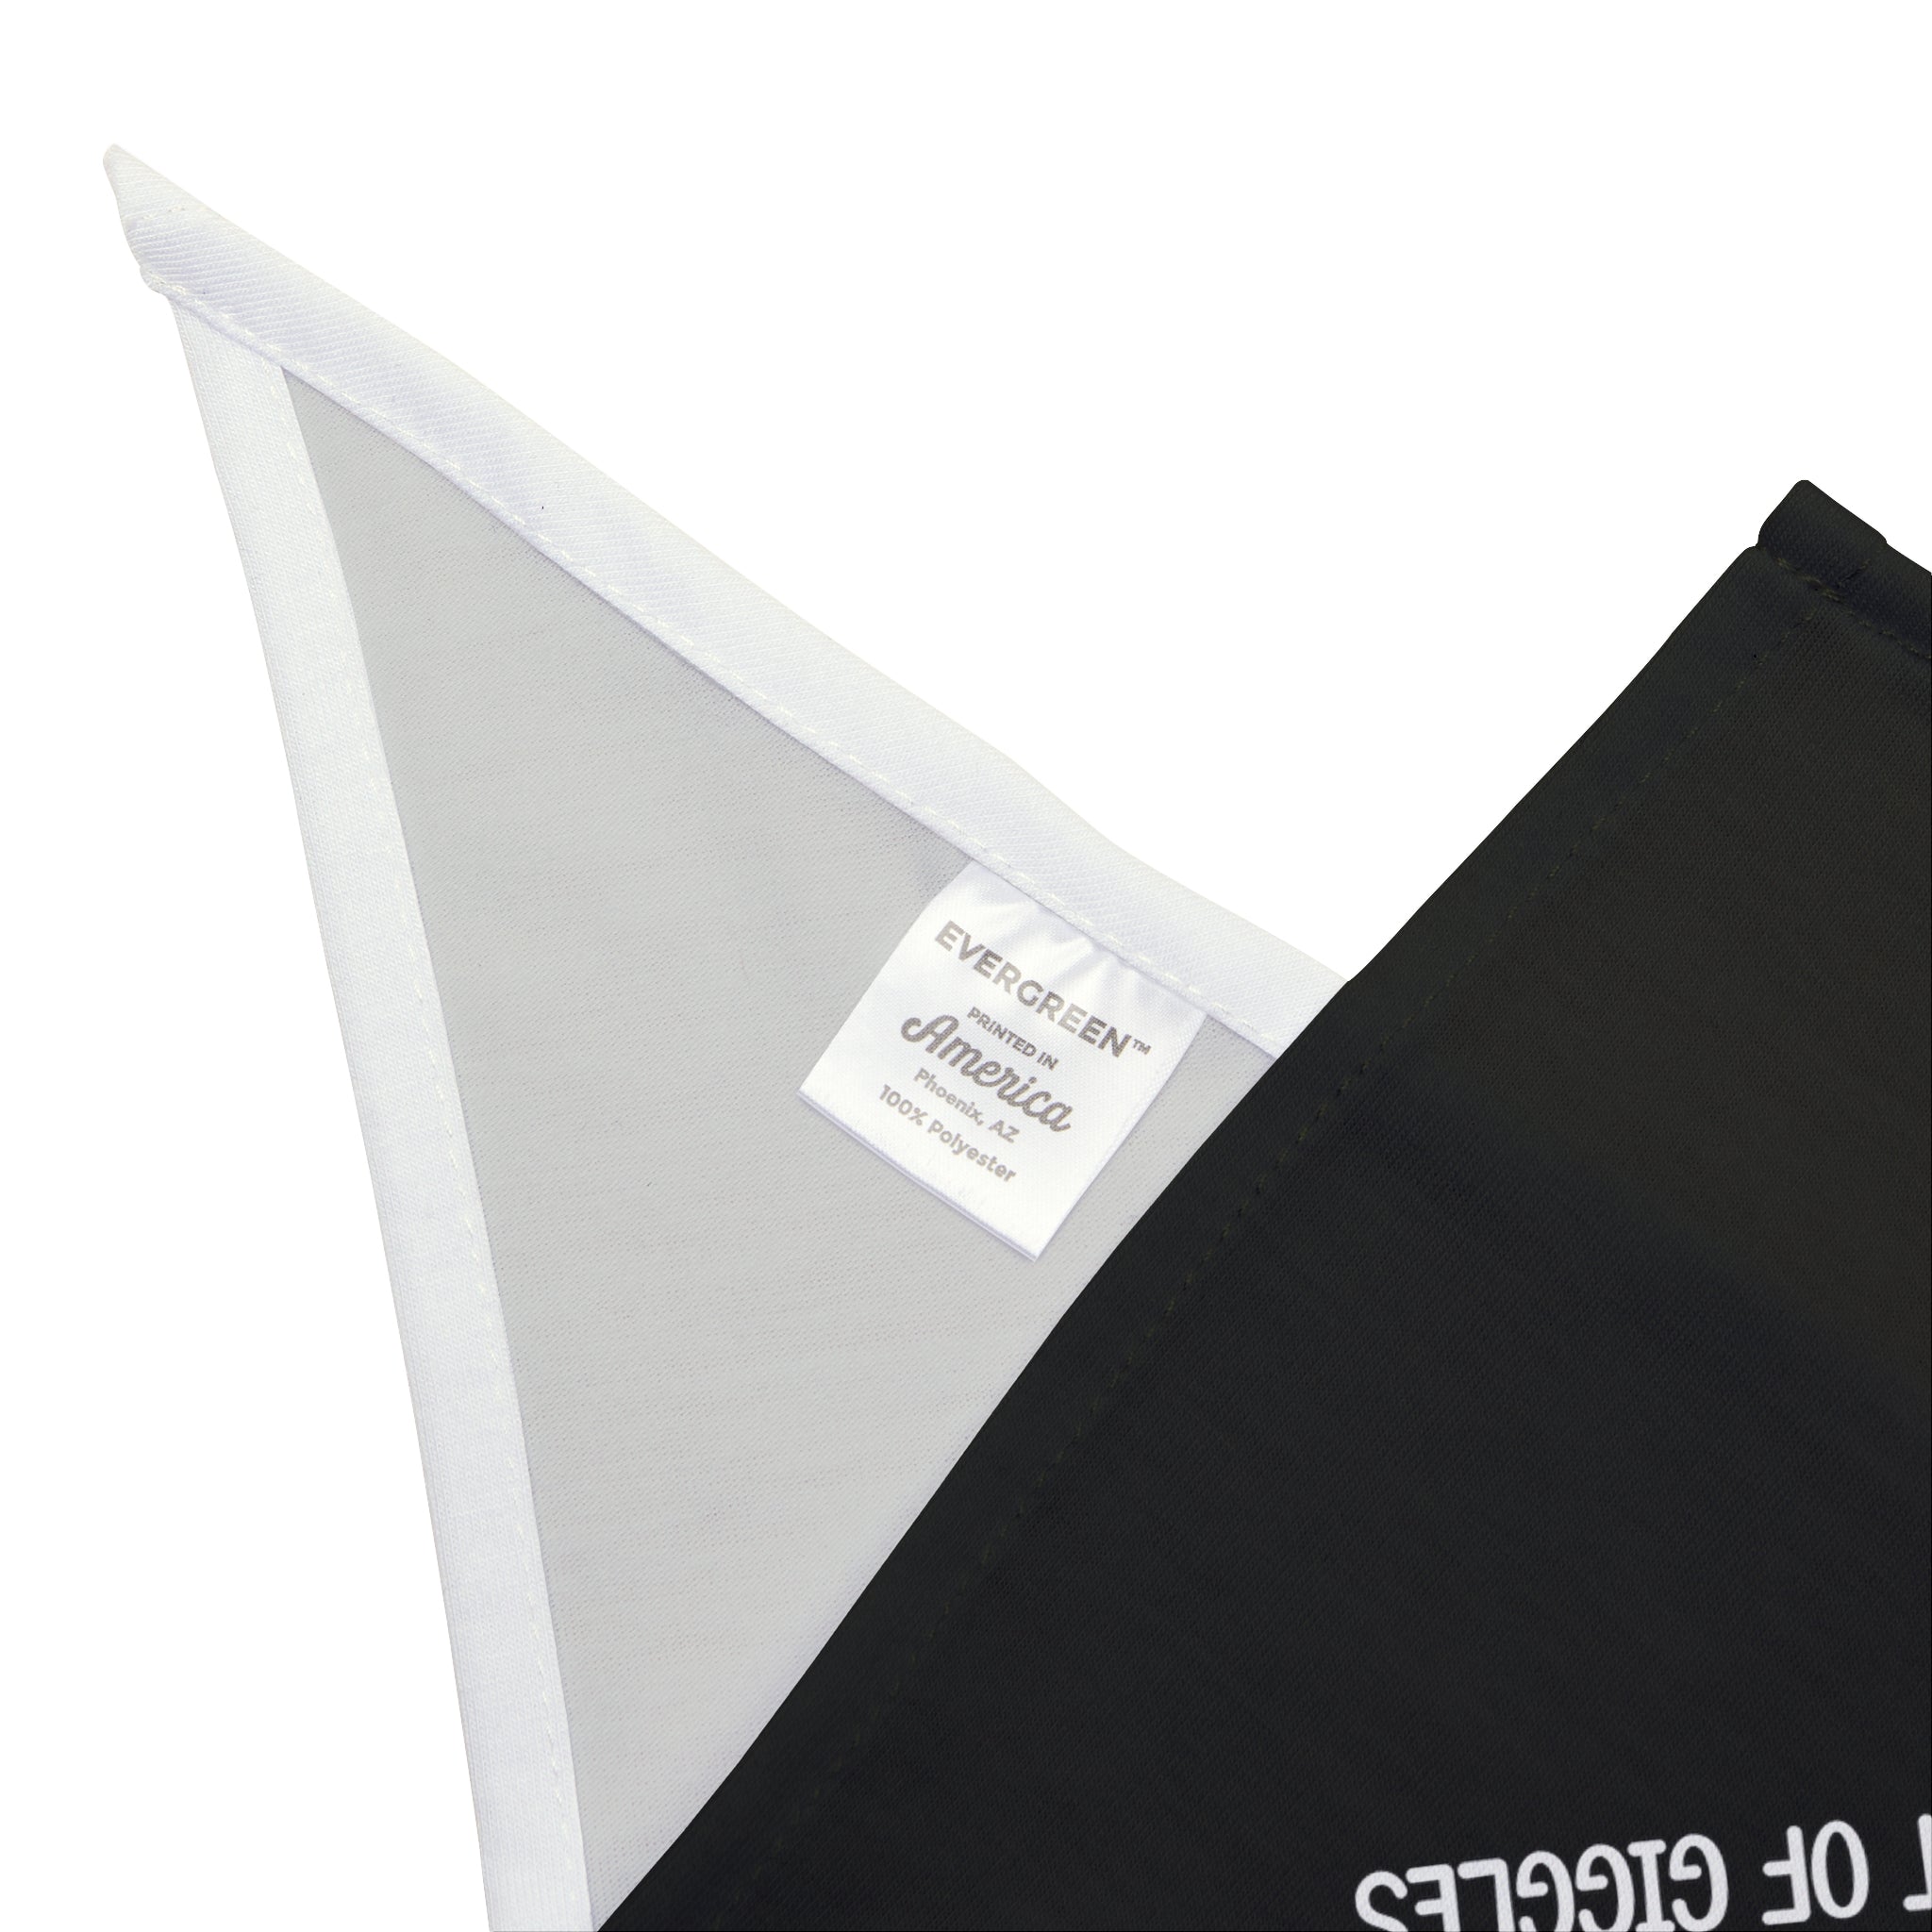 Close-up image of a corner of a black fabric with a white tag that reads "EVERGREEN America 100% polyester," showcasing its classy and durable, soft-spun polyester perfect for a stylish He-He - Pet Bandana.